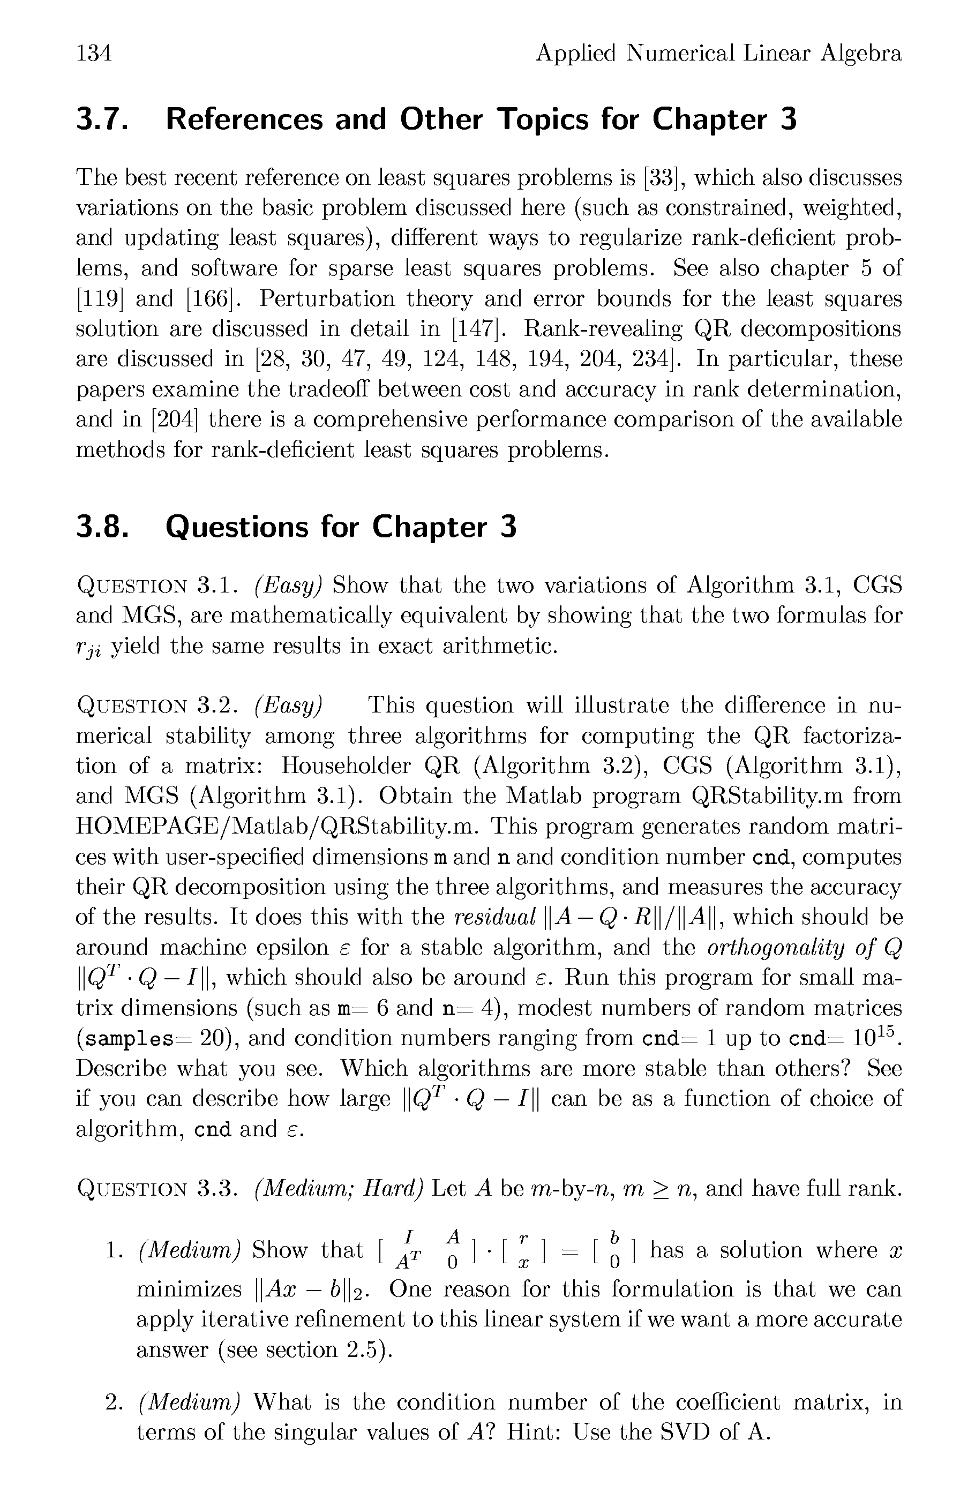 3.7 References and Other Topics for Chapter 3
3.8 Questions for Chapter 3